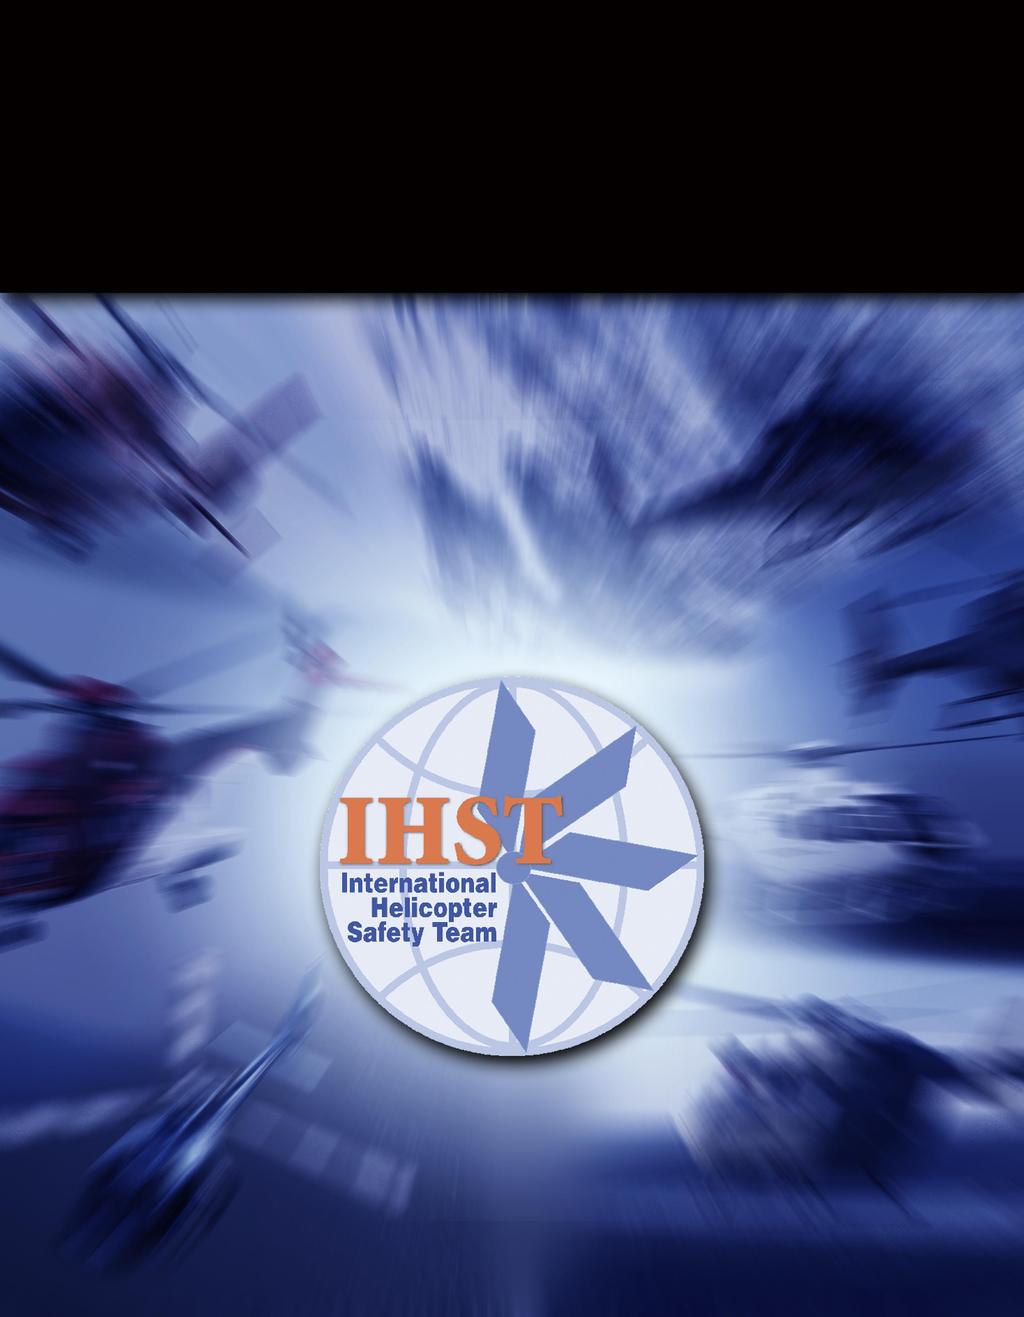 HELICOPTER MAINTENANCE TOOLKIT European Helicopter Safety Team 1 st Edition An Official Publication of the International Helicopter Safety Team March 2011 1 All information in this publication has